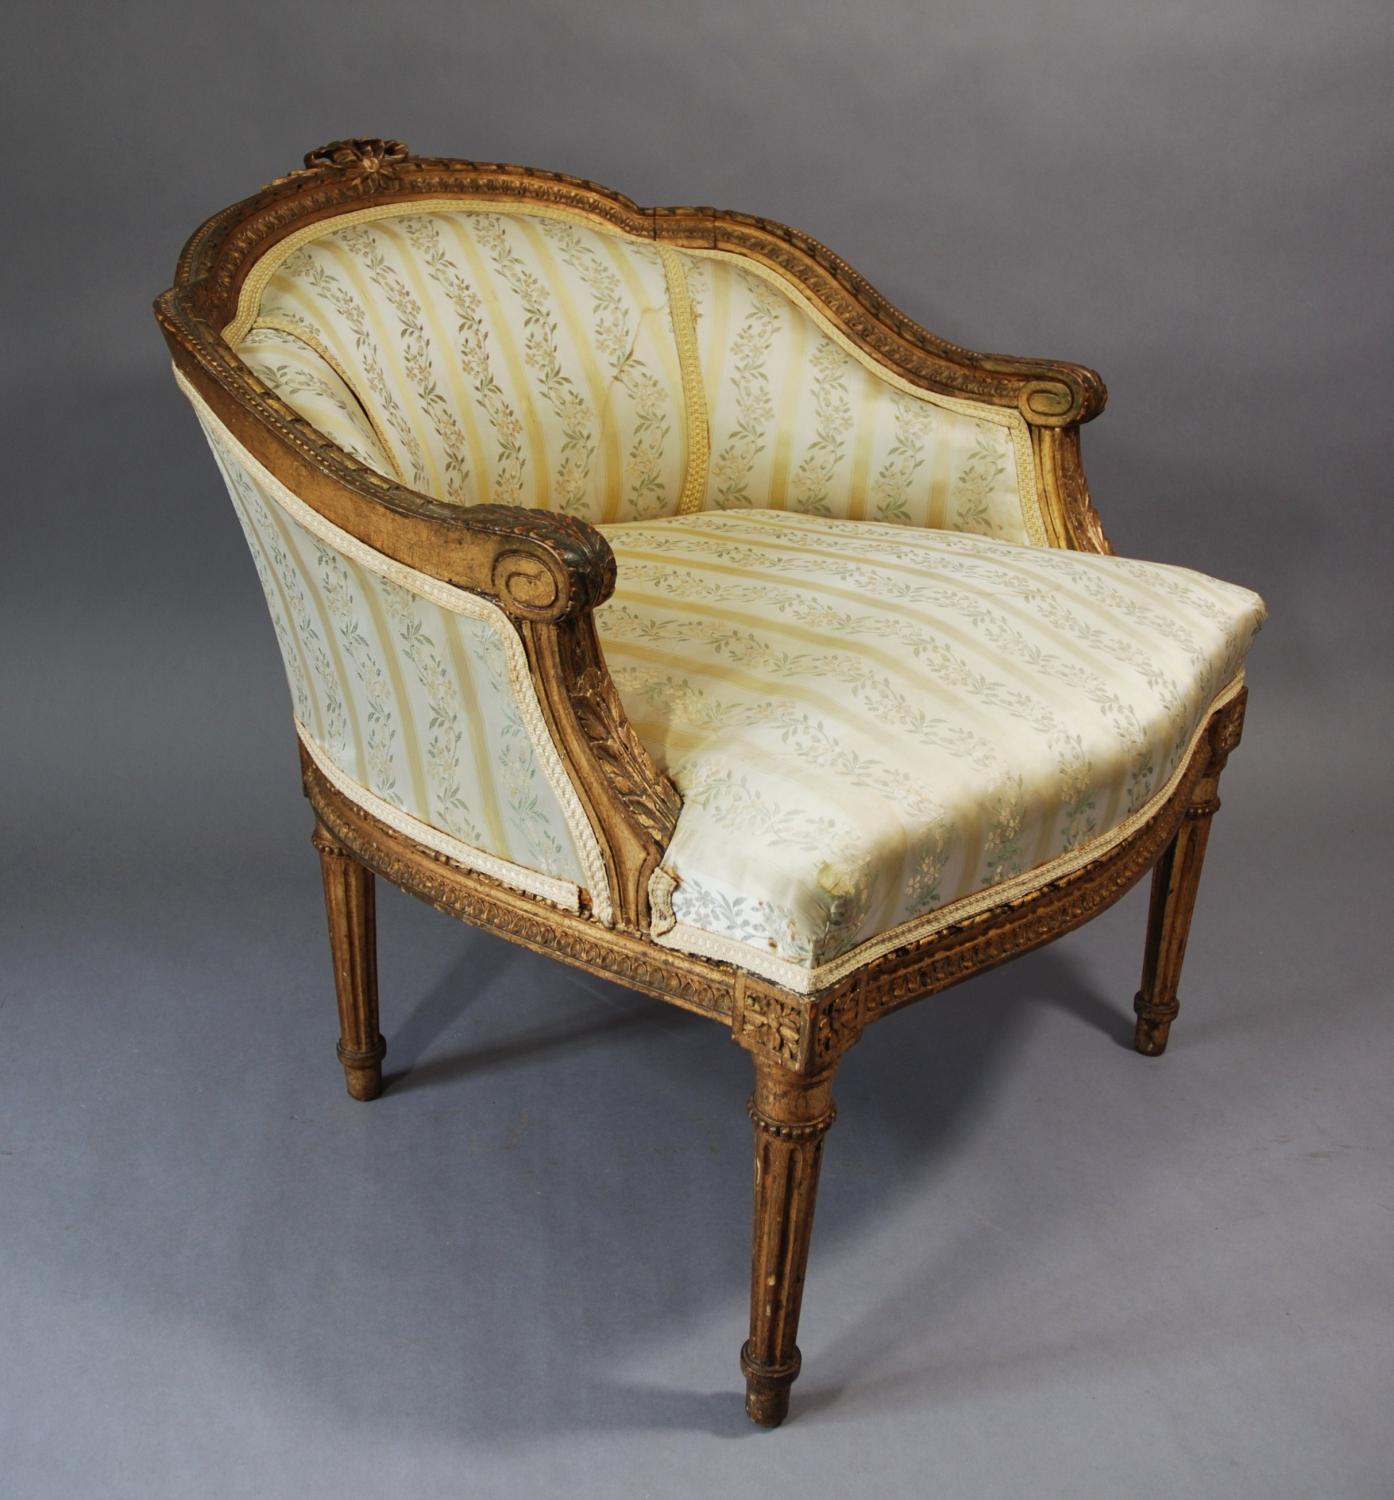 19thc French low back chair, with gilt finish